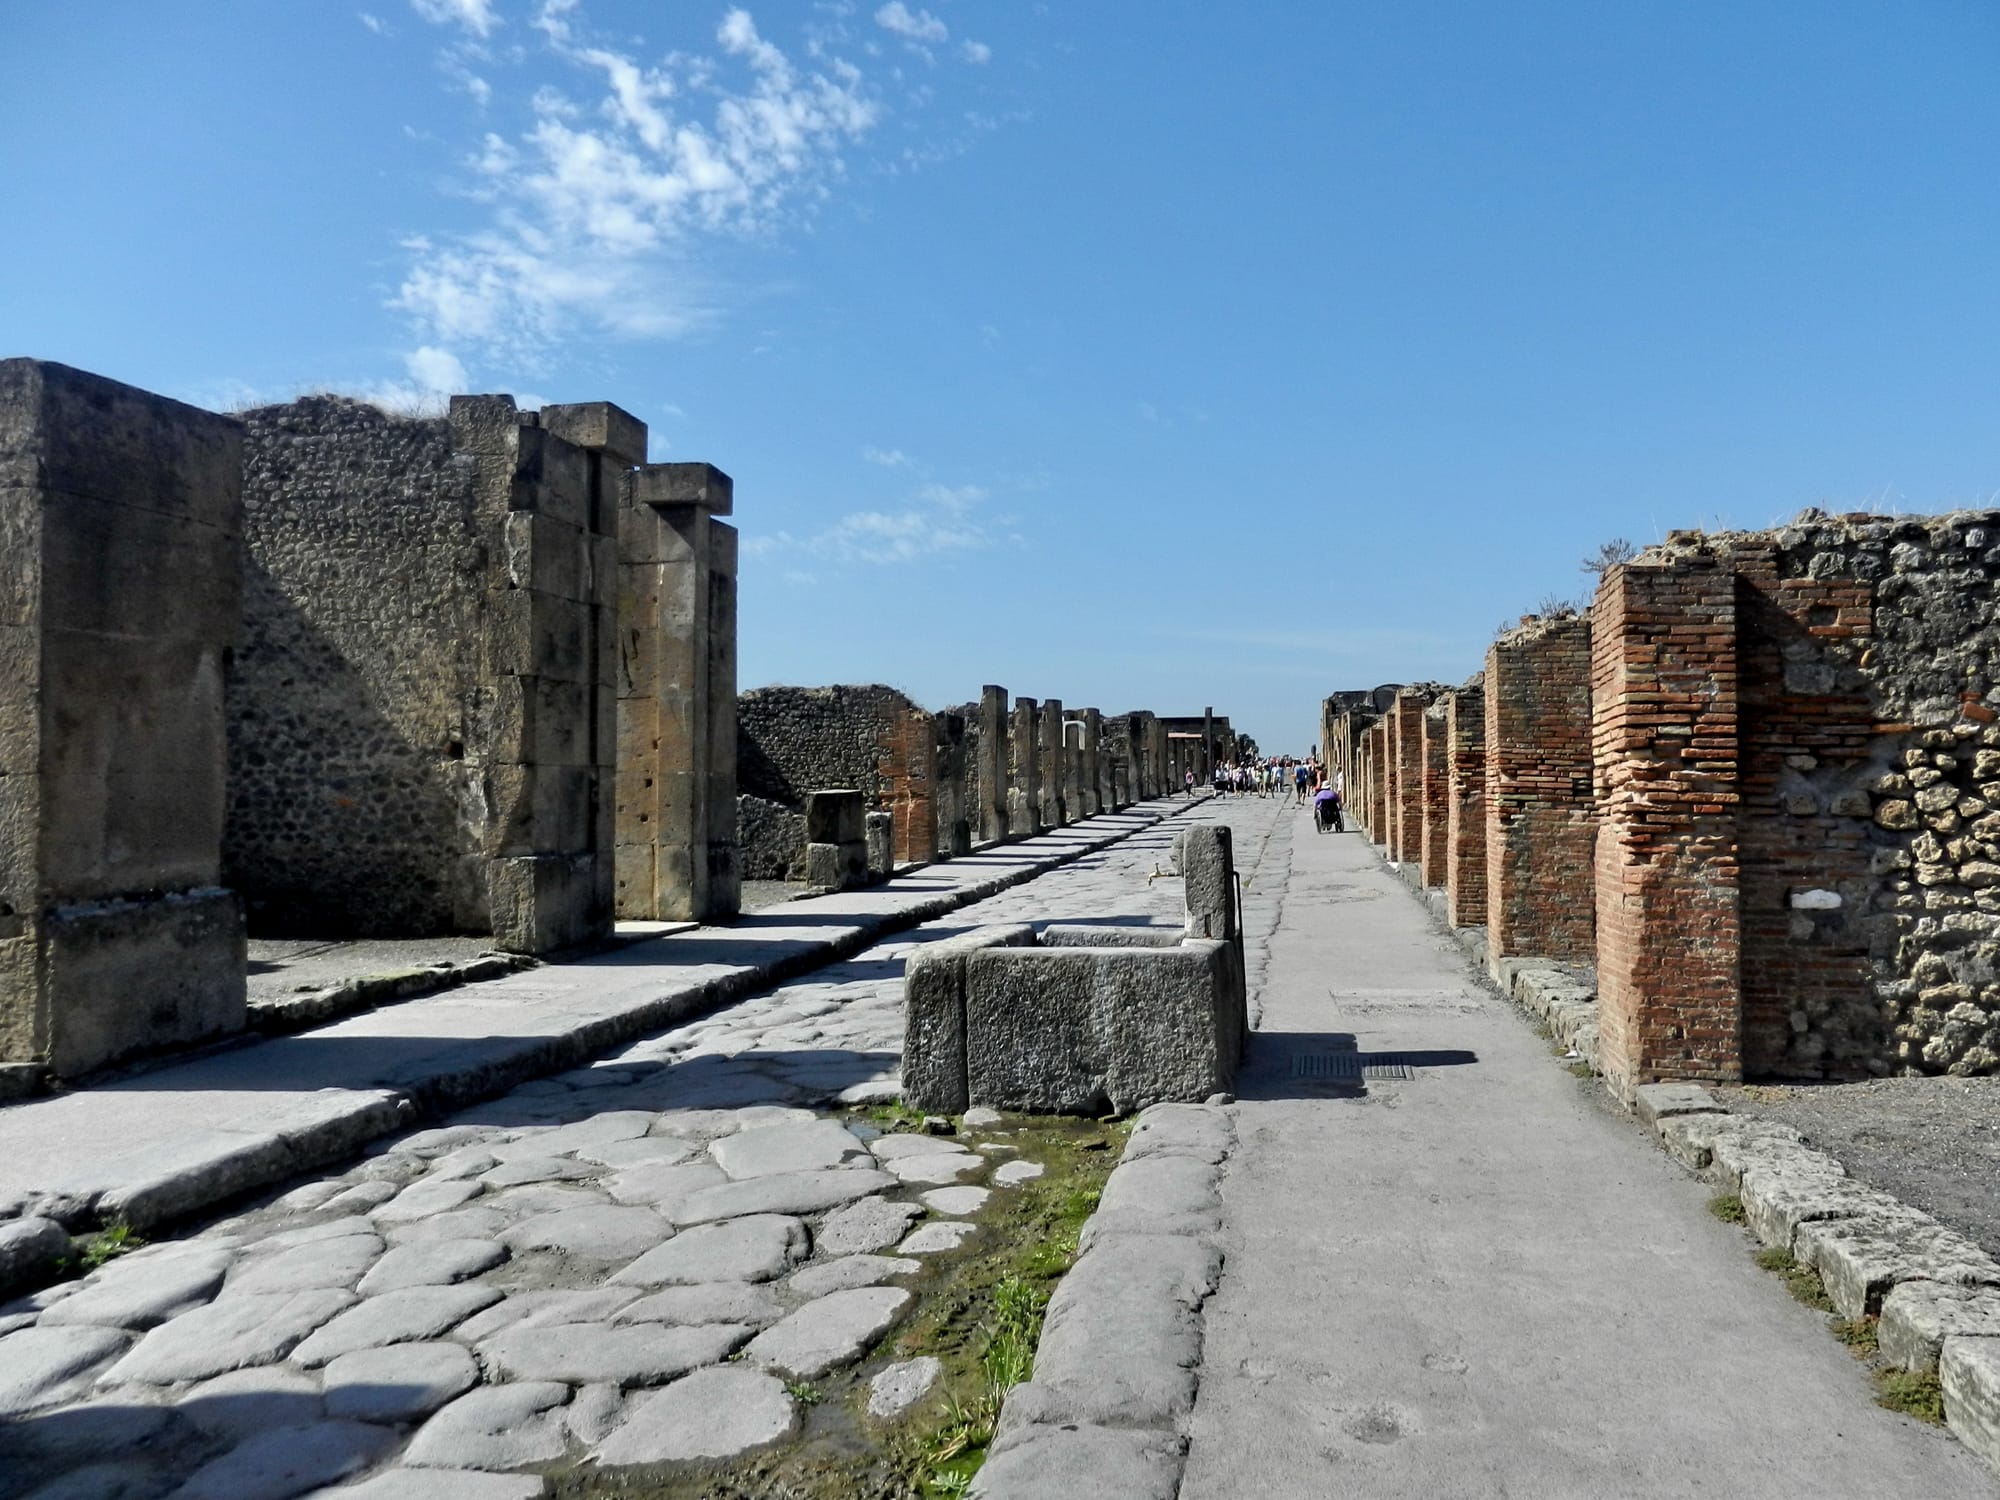 Pompeii the day Vesuvius erupted: From Prosperity to Ashes